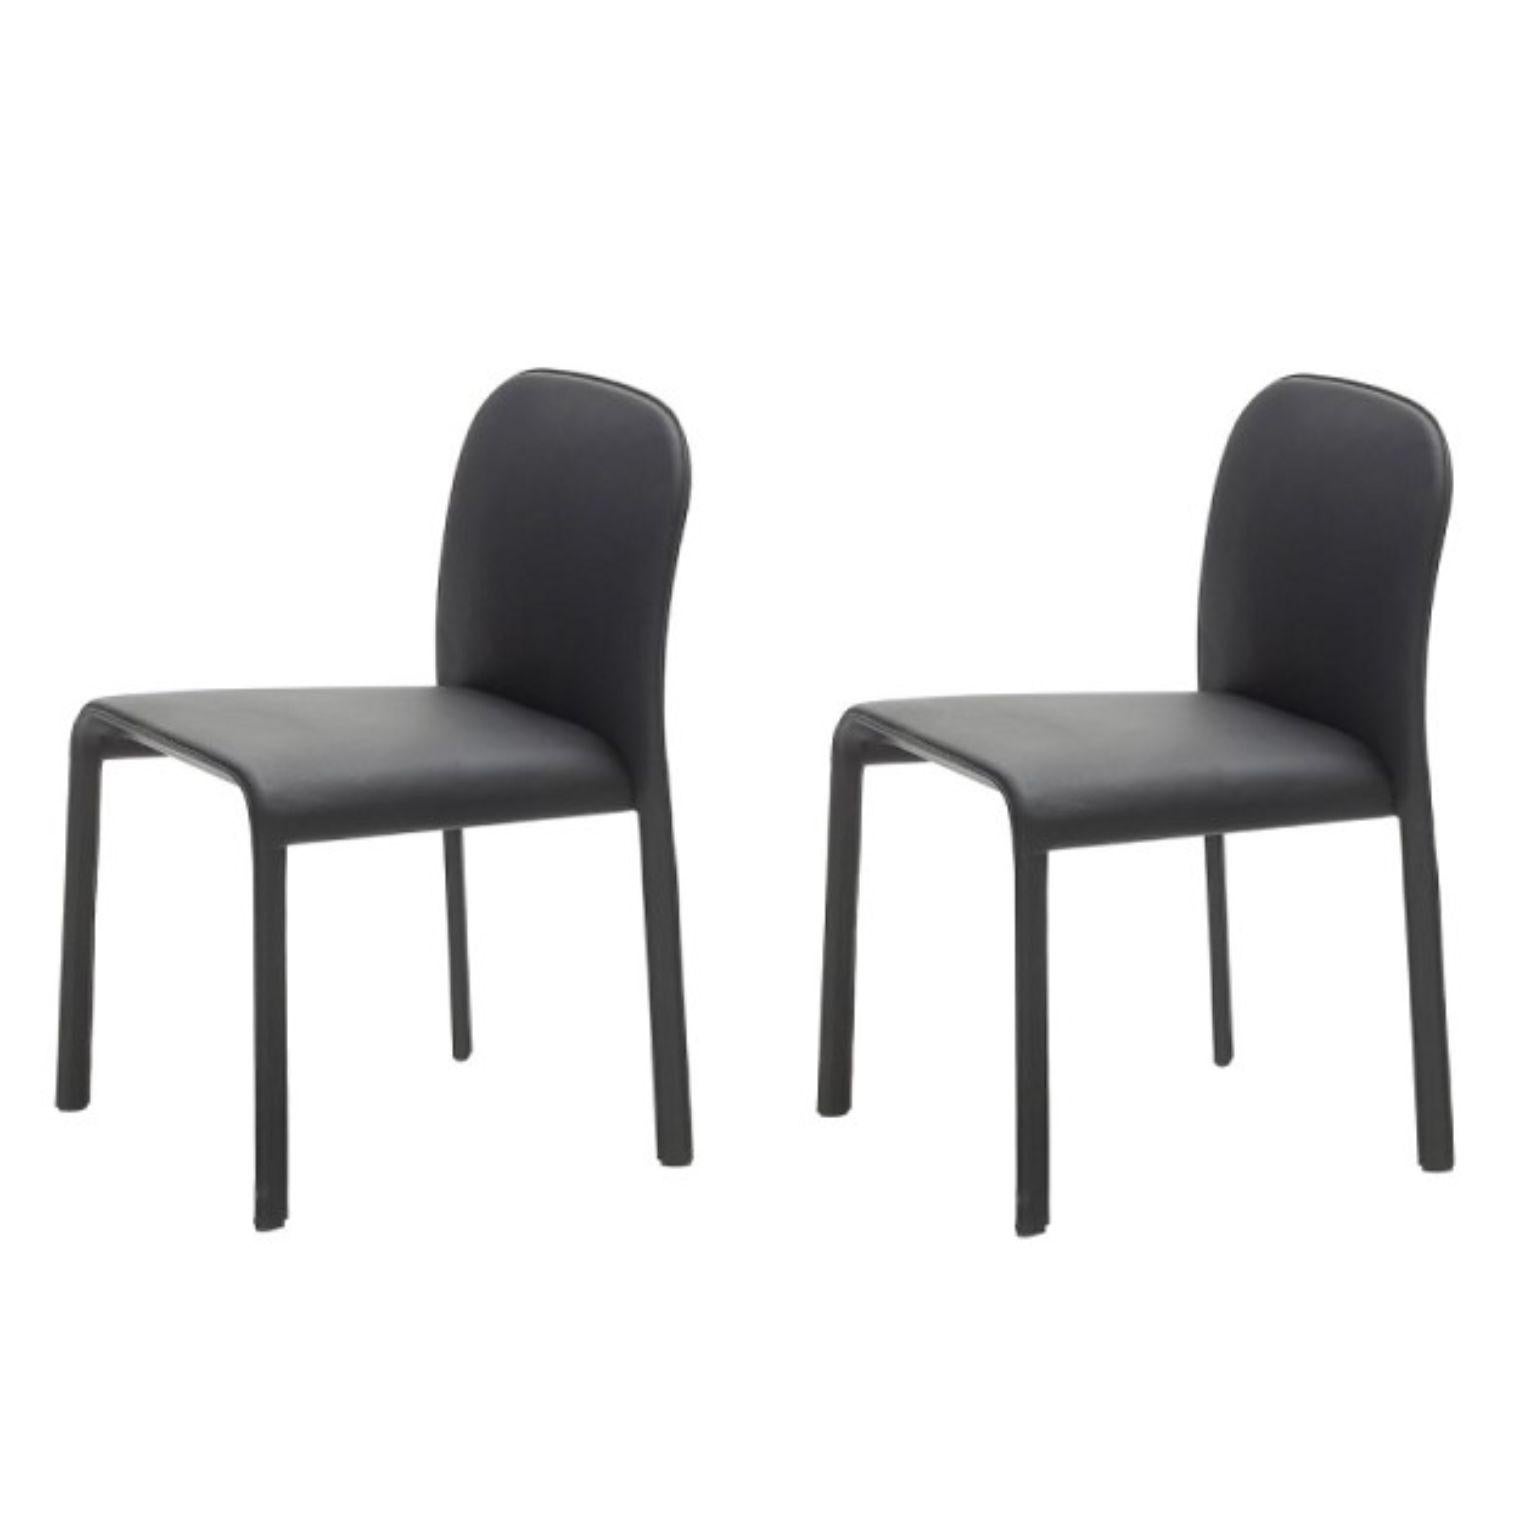 Set of 2 Scala chairs by Patrick Jouin
Materials: chair covered in corrected pigmented cowhide leather. Backrest in split leather. Colors: black, brown, white, red
Dimensions: D 45 x W 55 x H 80 cm
Also available in colors: black, brown, white,